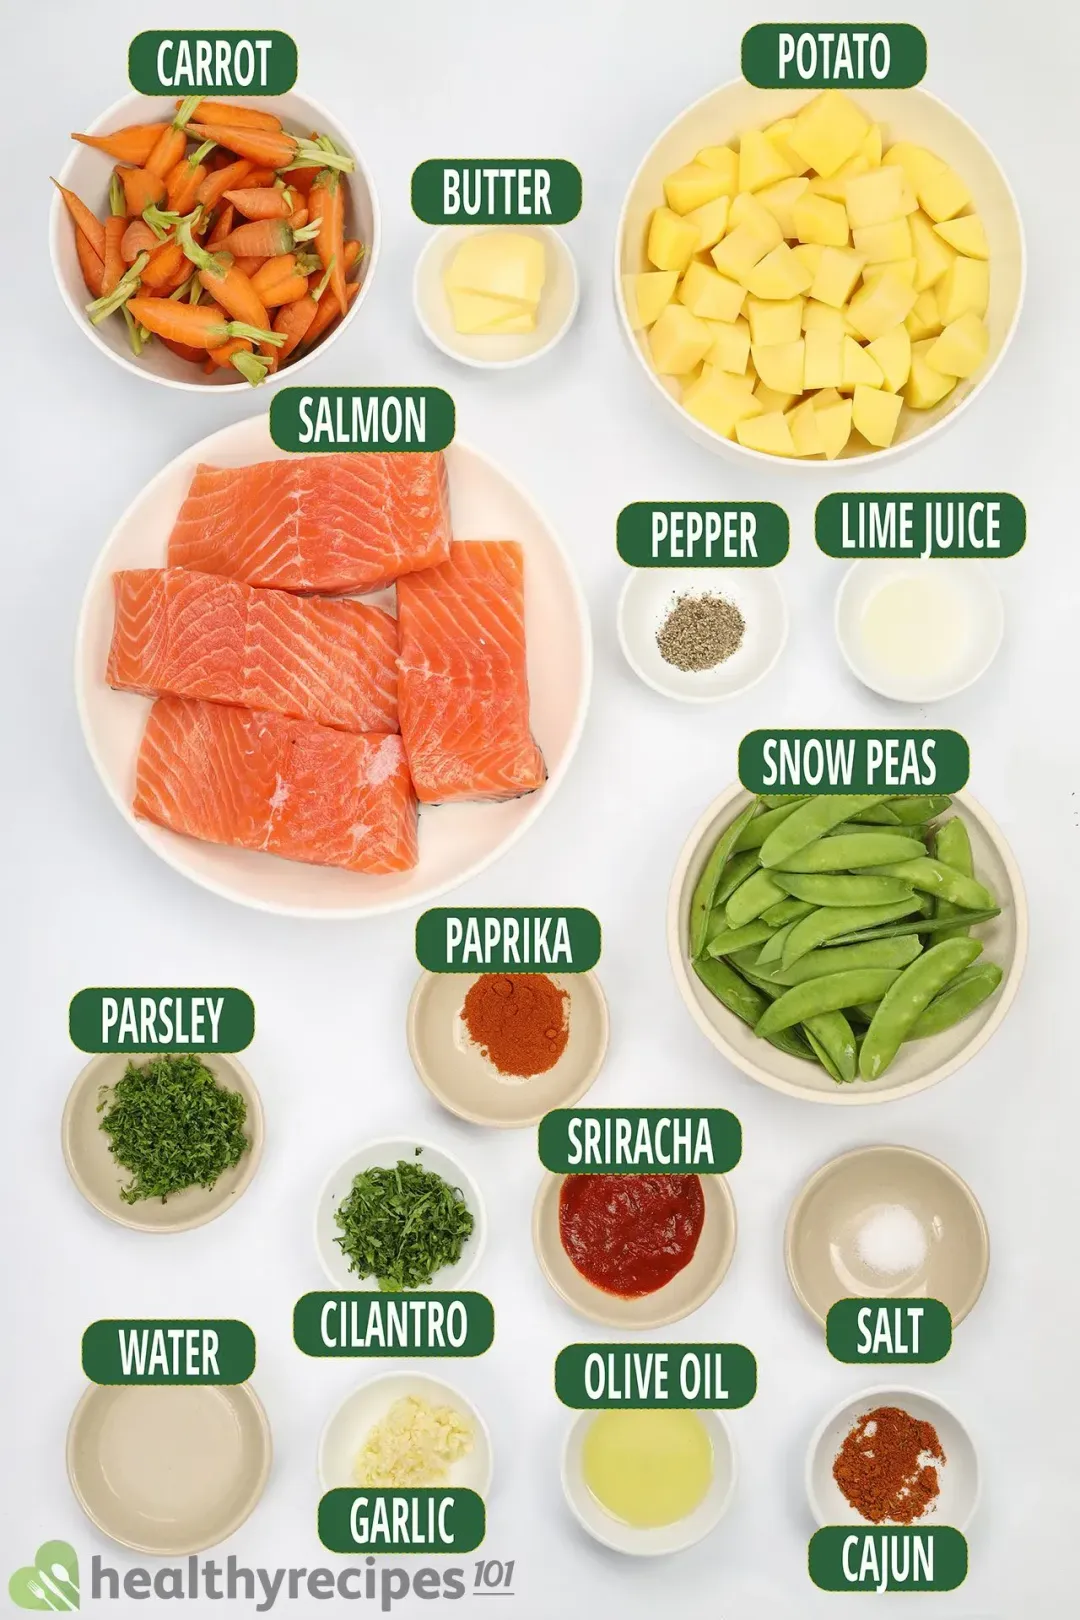 Ingredients for this Instant Pot salmon: boneless salmon fillets, baby carrots, cubed potatoes, snow peas, chopped parsley and cilantro, minced garlic, butter, Cajun seasoning, and other spices and condiments